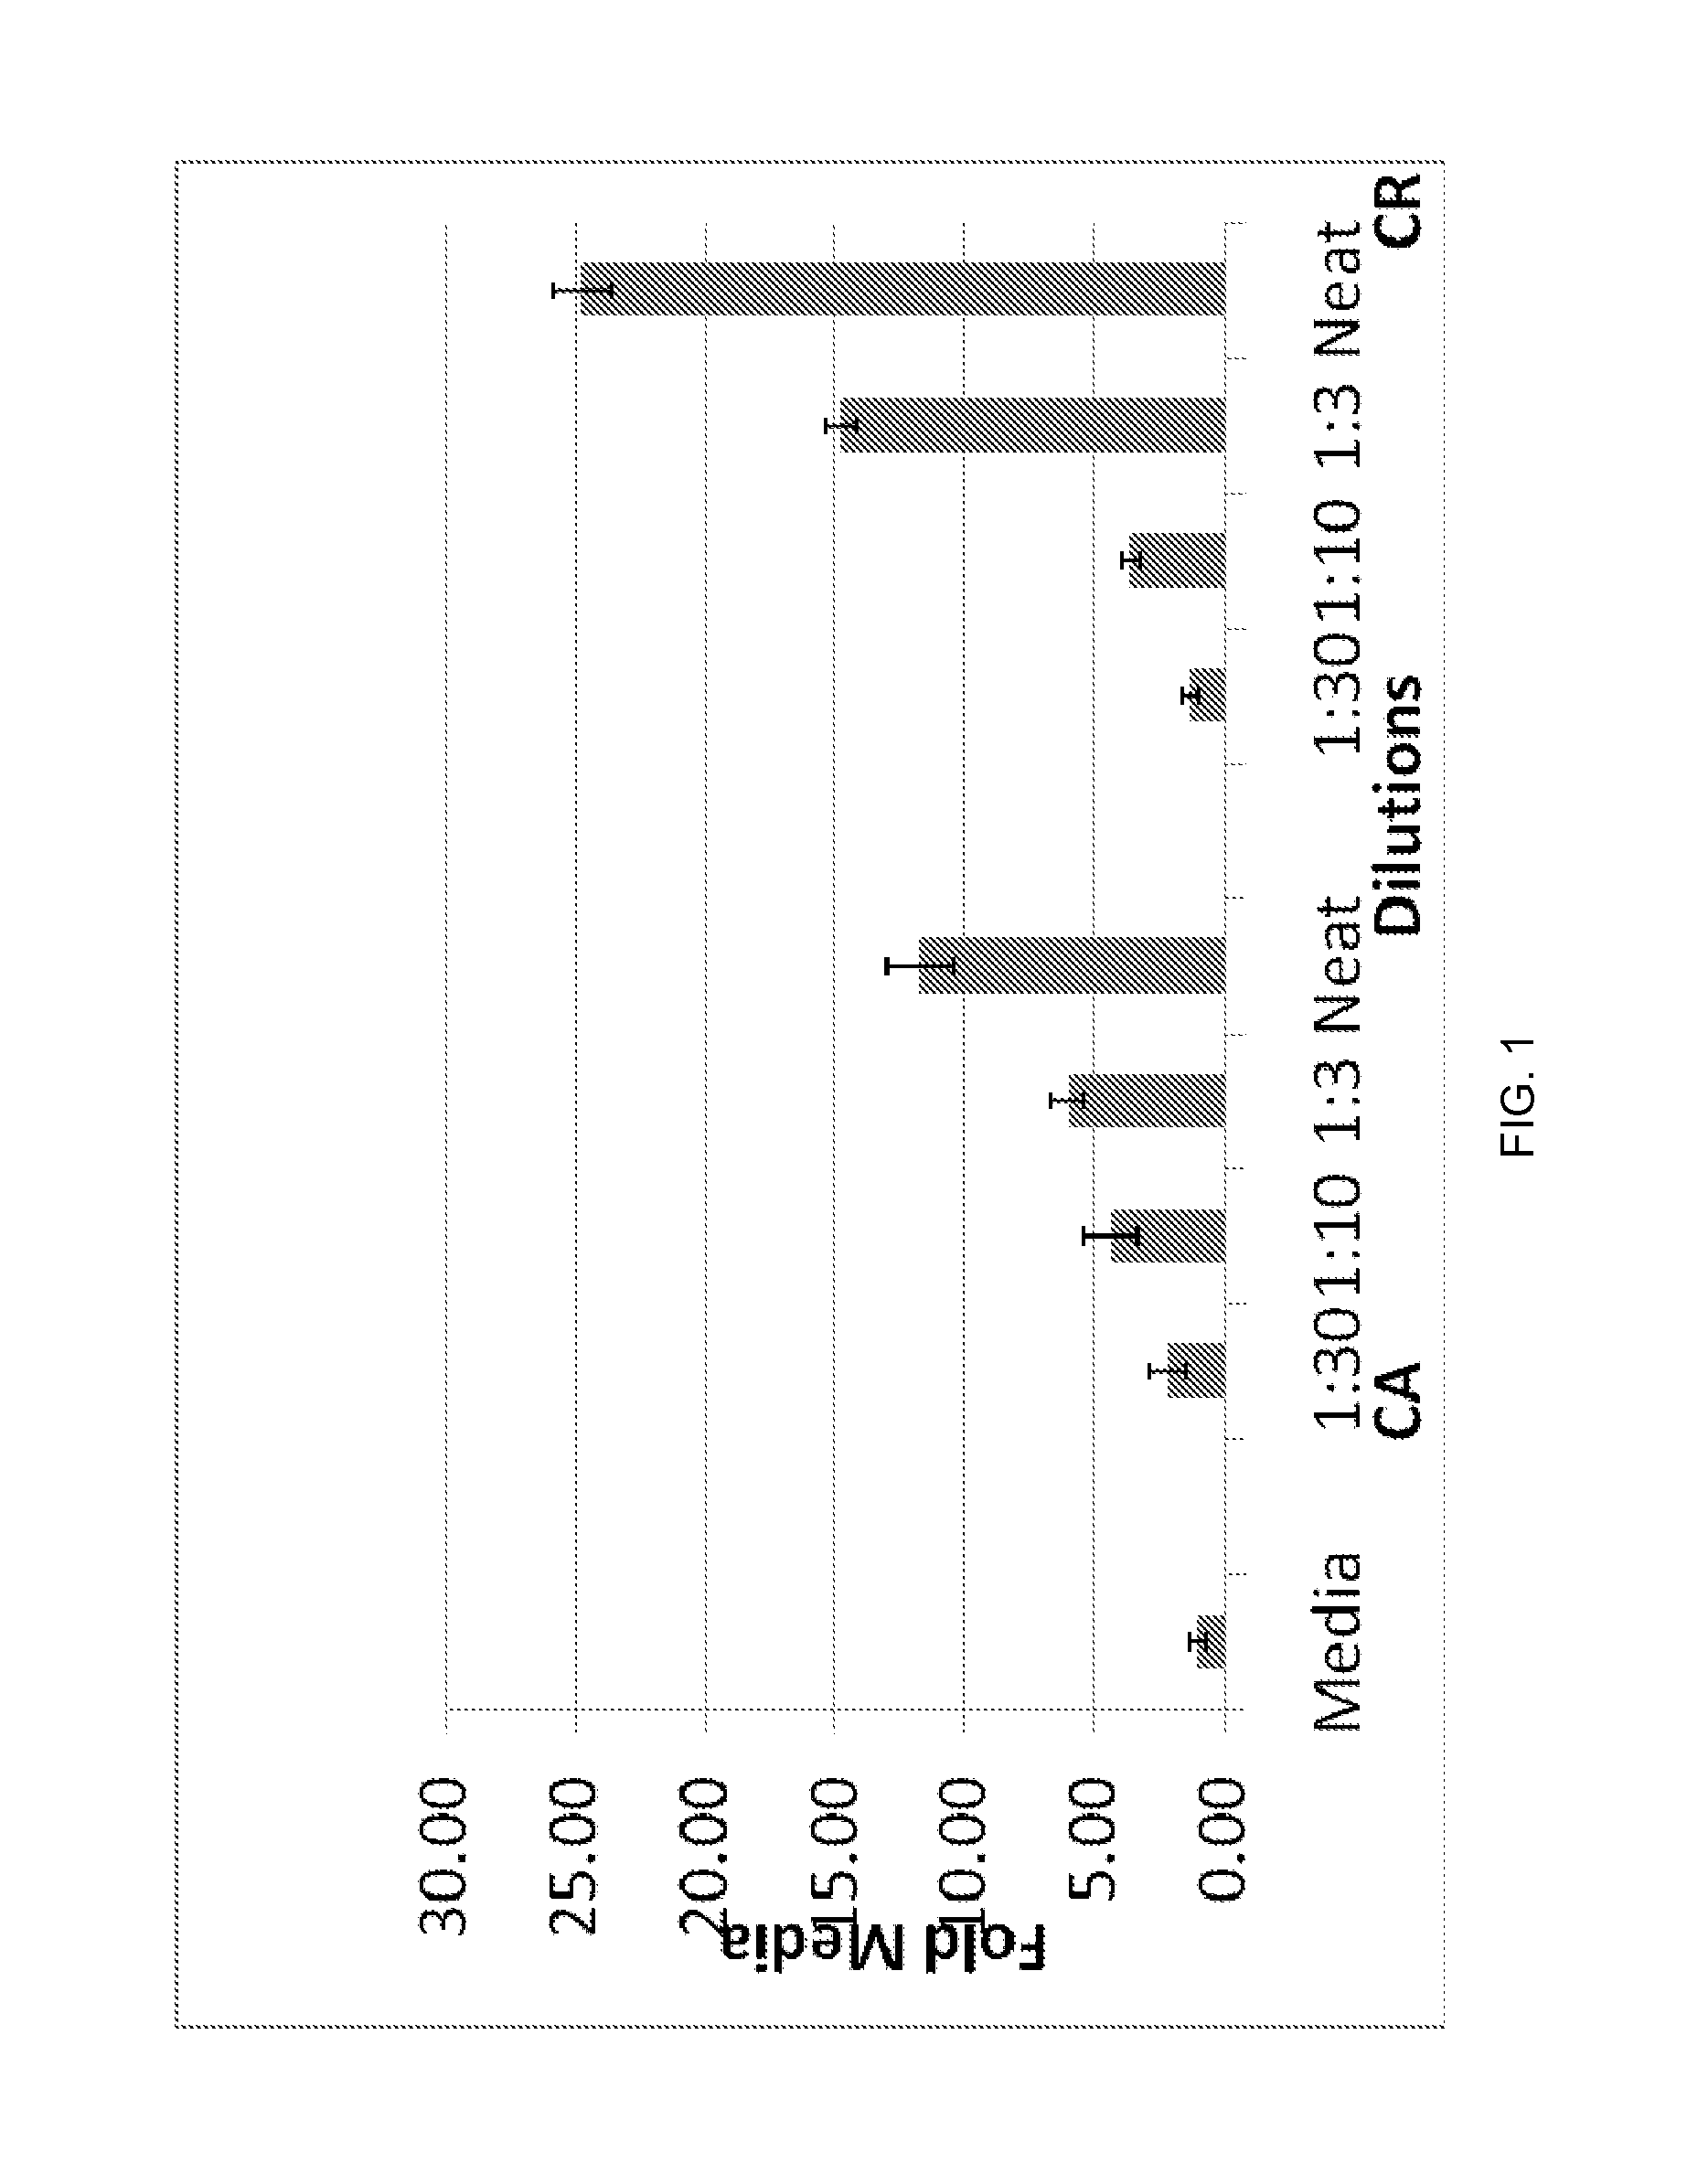 Methods of modulating the negative chemotaxis of immune cells